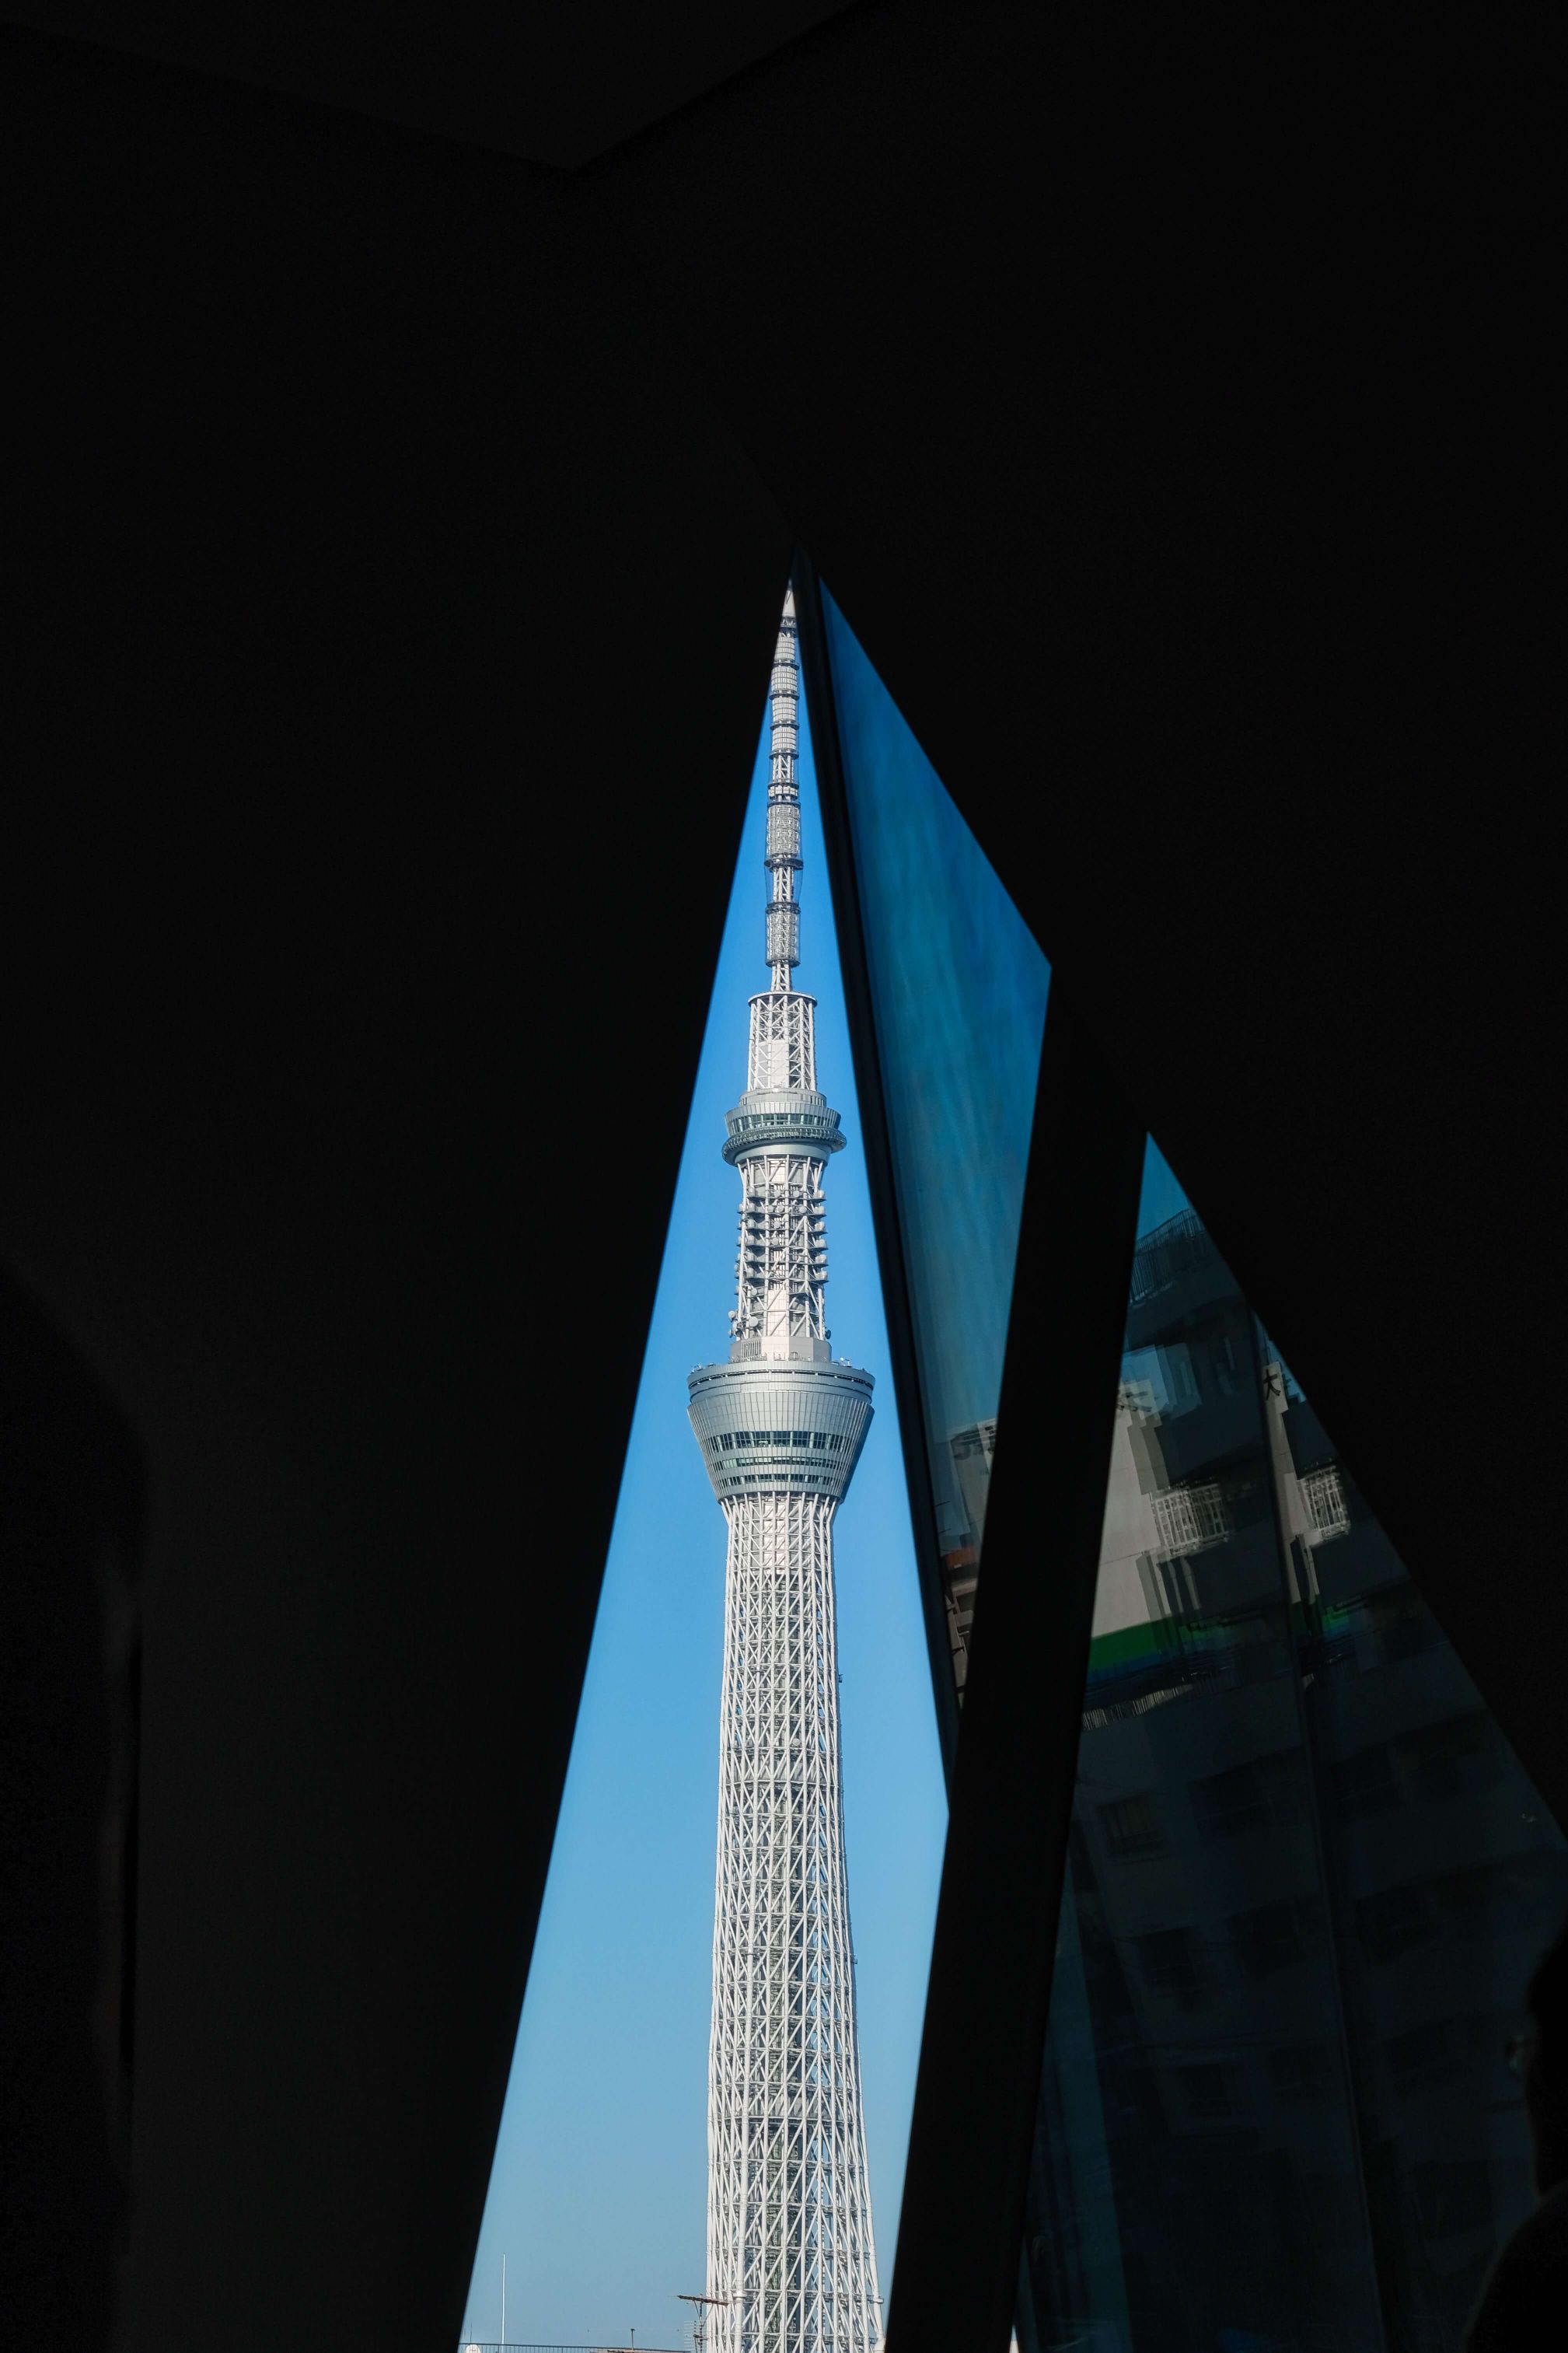 The reflections of the tower on the right via a mirror and the geometrical shapes in the picture make this an artistic way to take a picture of the Skytree.